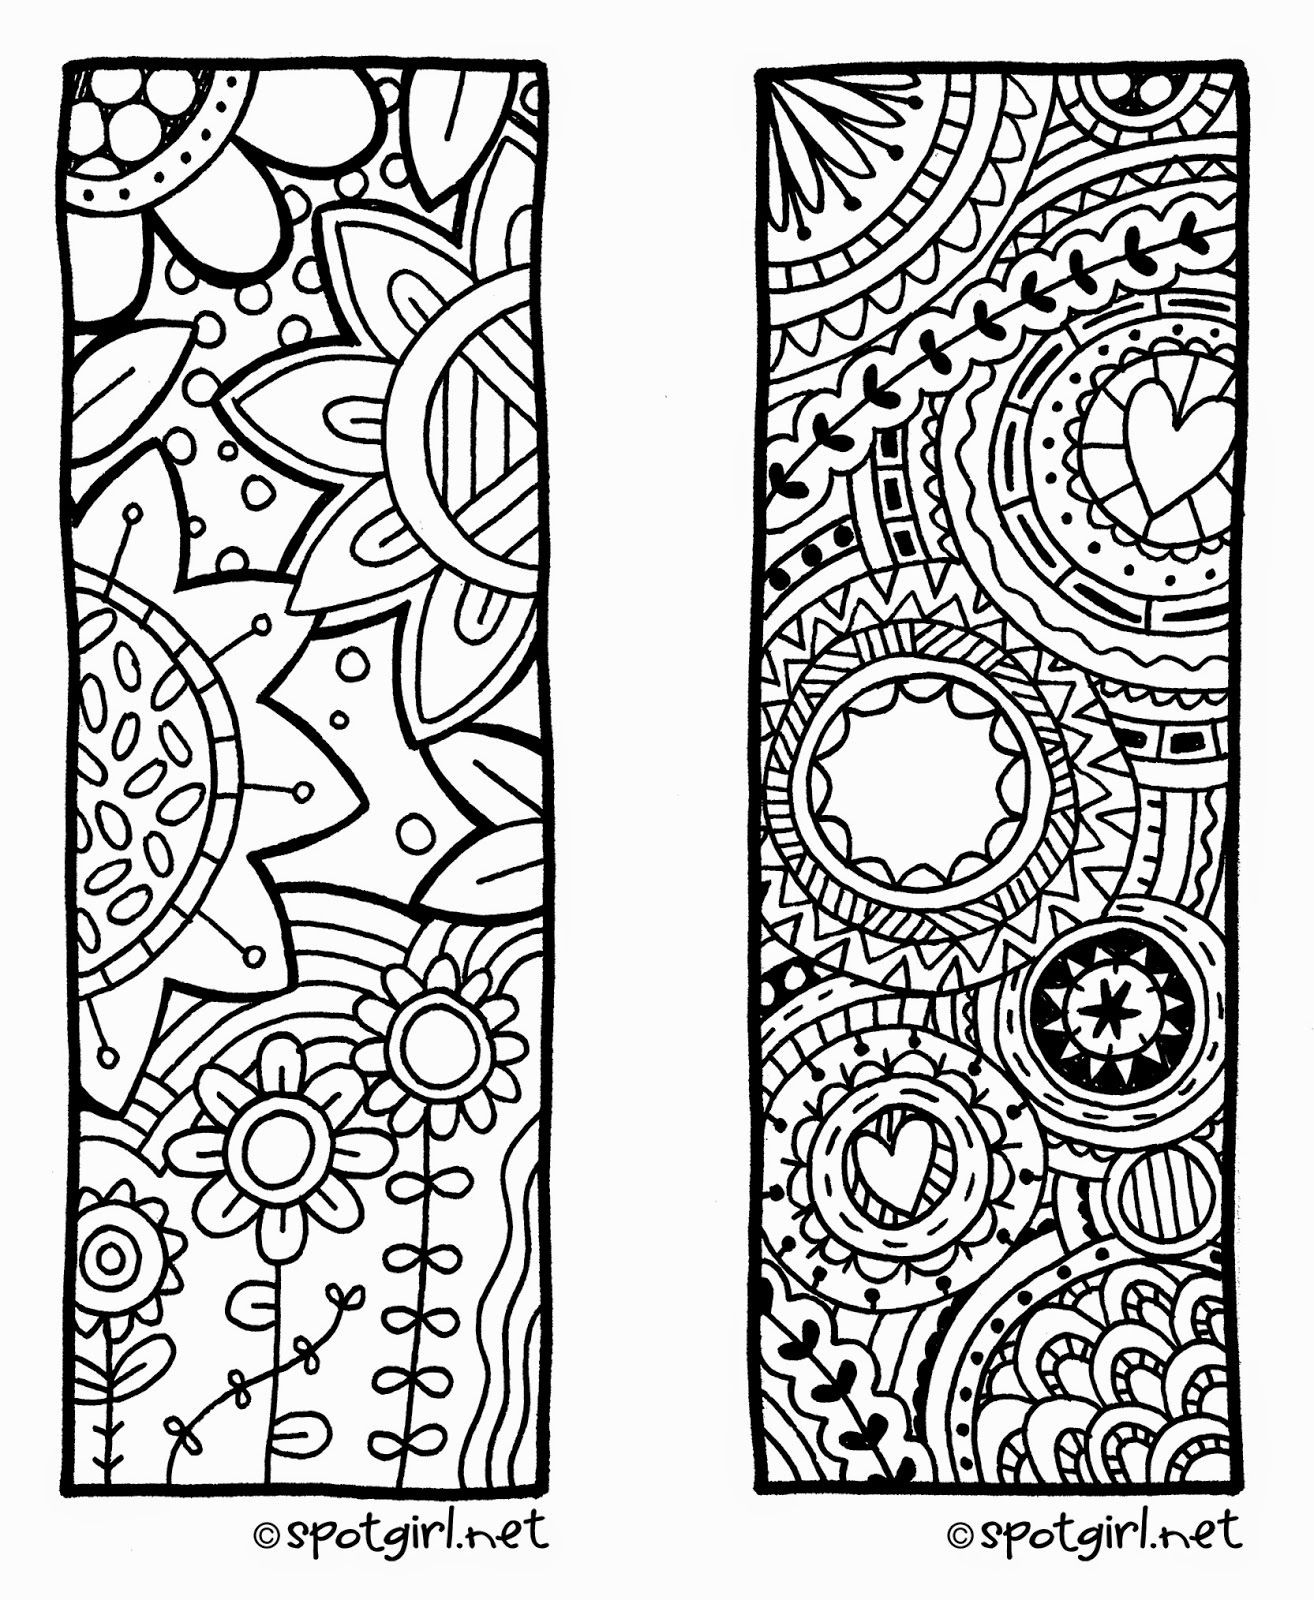 Zentangle Coloring Sheets For Boys
 Zentangle bookmark printable from spotgirl hotcakes